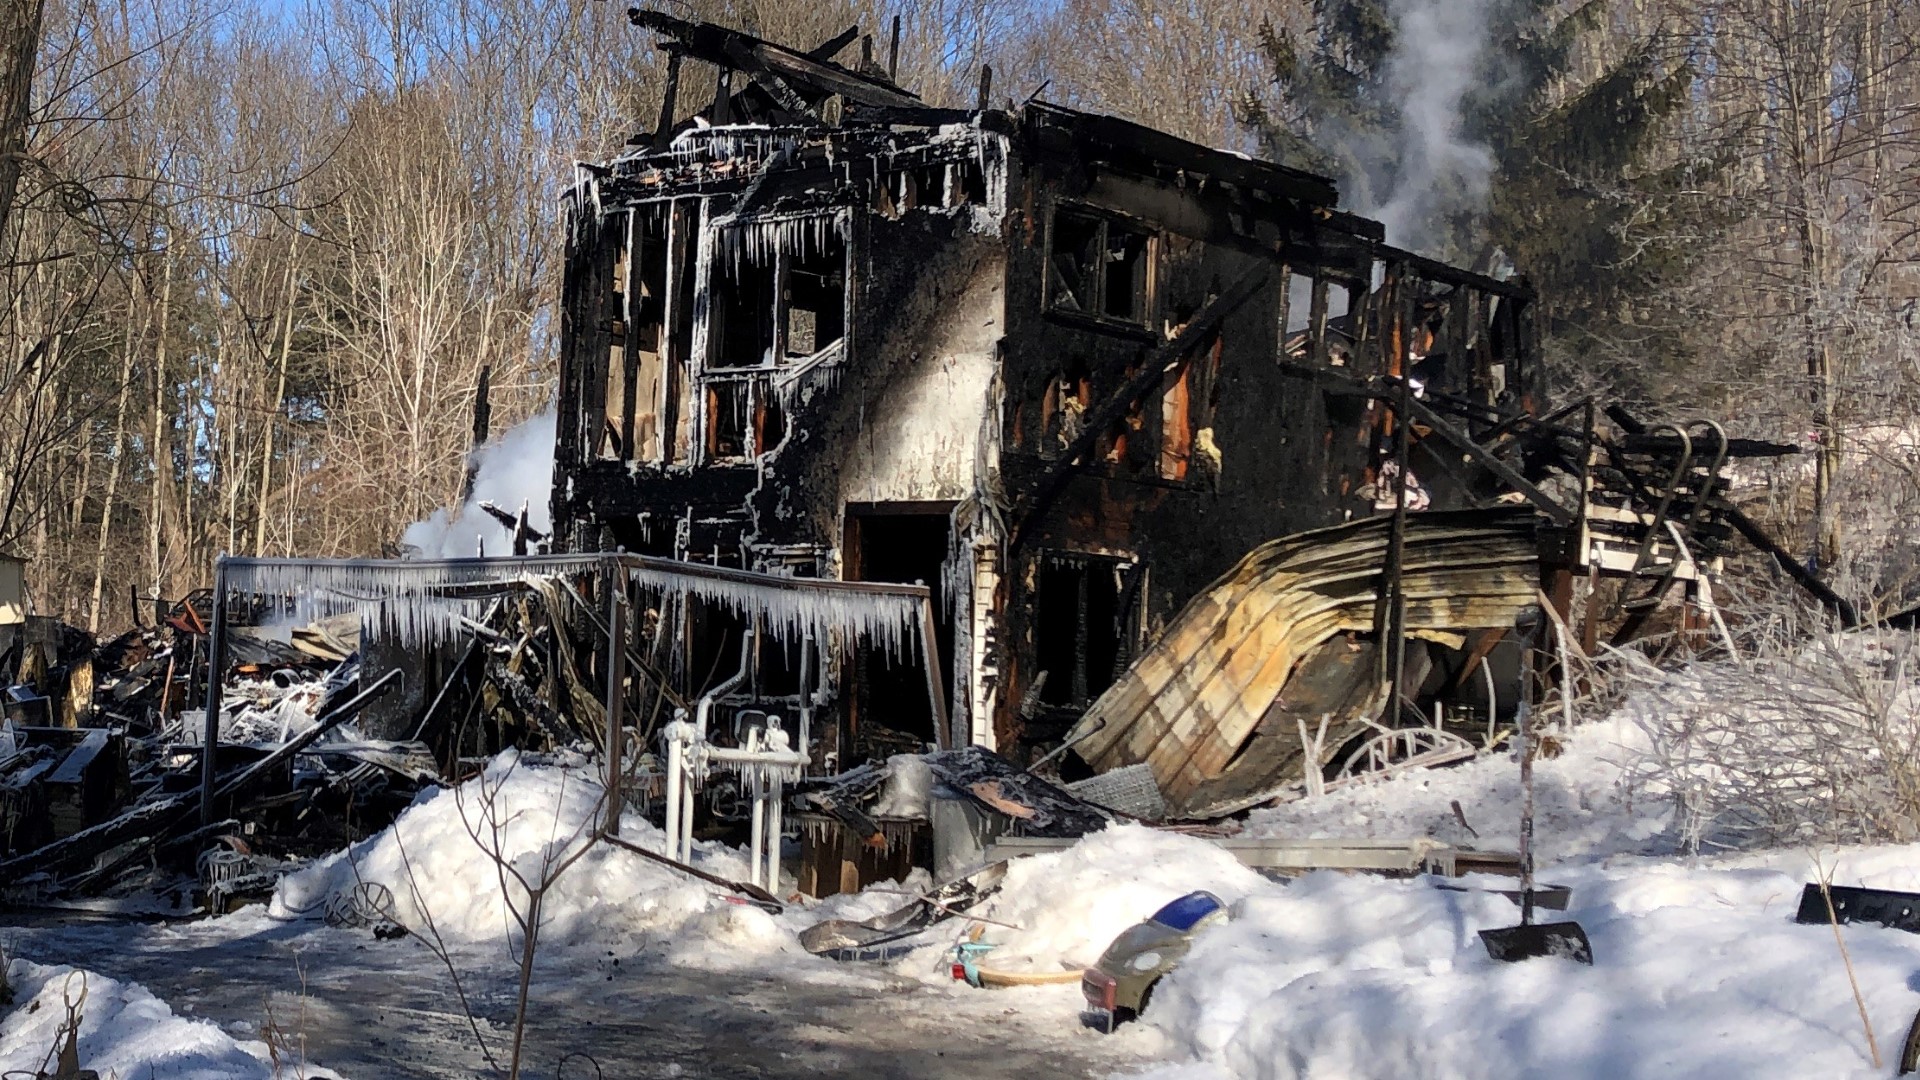 Three people in the home got out safely when the fire started Tuesday morning.